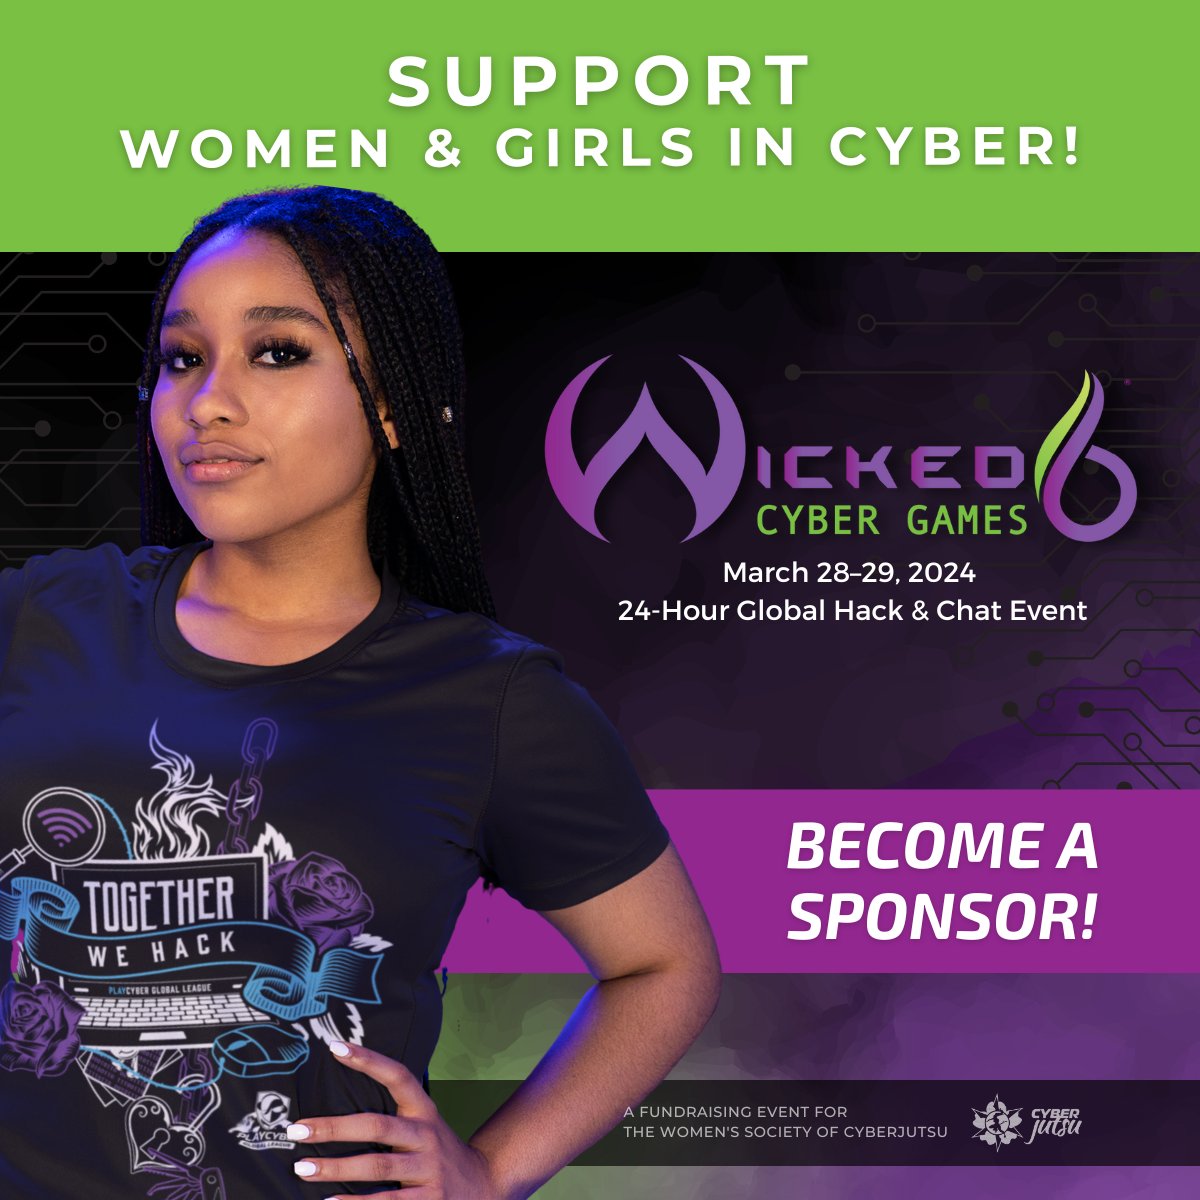 Passionate about helping women embrace #cybersecurity careers? 

#Wicked6 needs #sponsors to help us reach thousands of women so they can learn new #cyberskills playing #cybergames, network w/ #womenincyber, & hear great speakers.
Become a Sponsor |  hubs.li/Q01SjFC40
#CTF